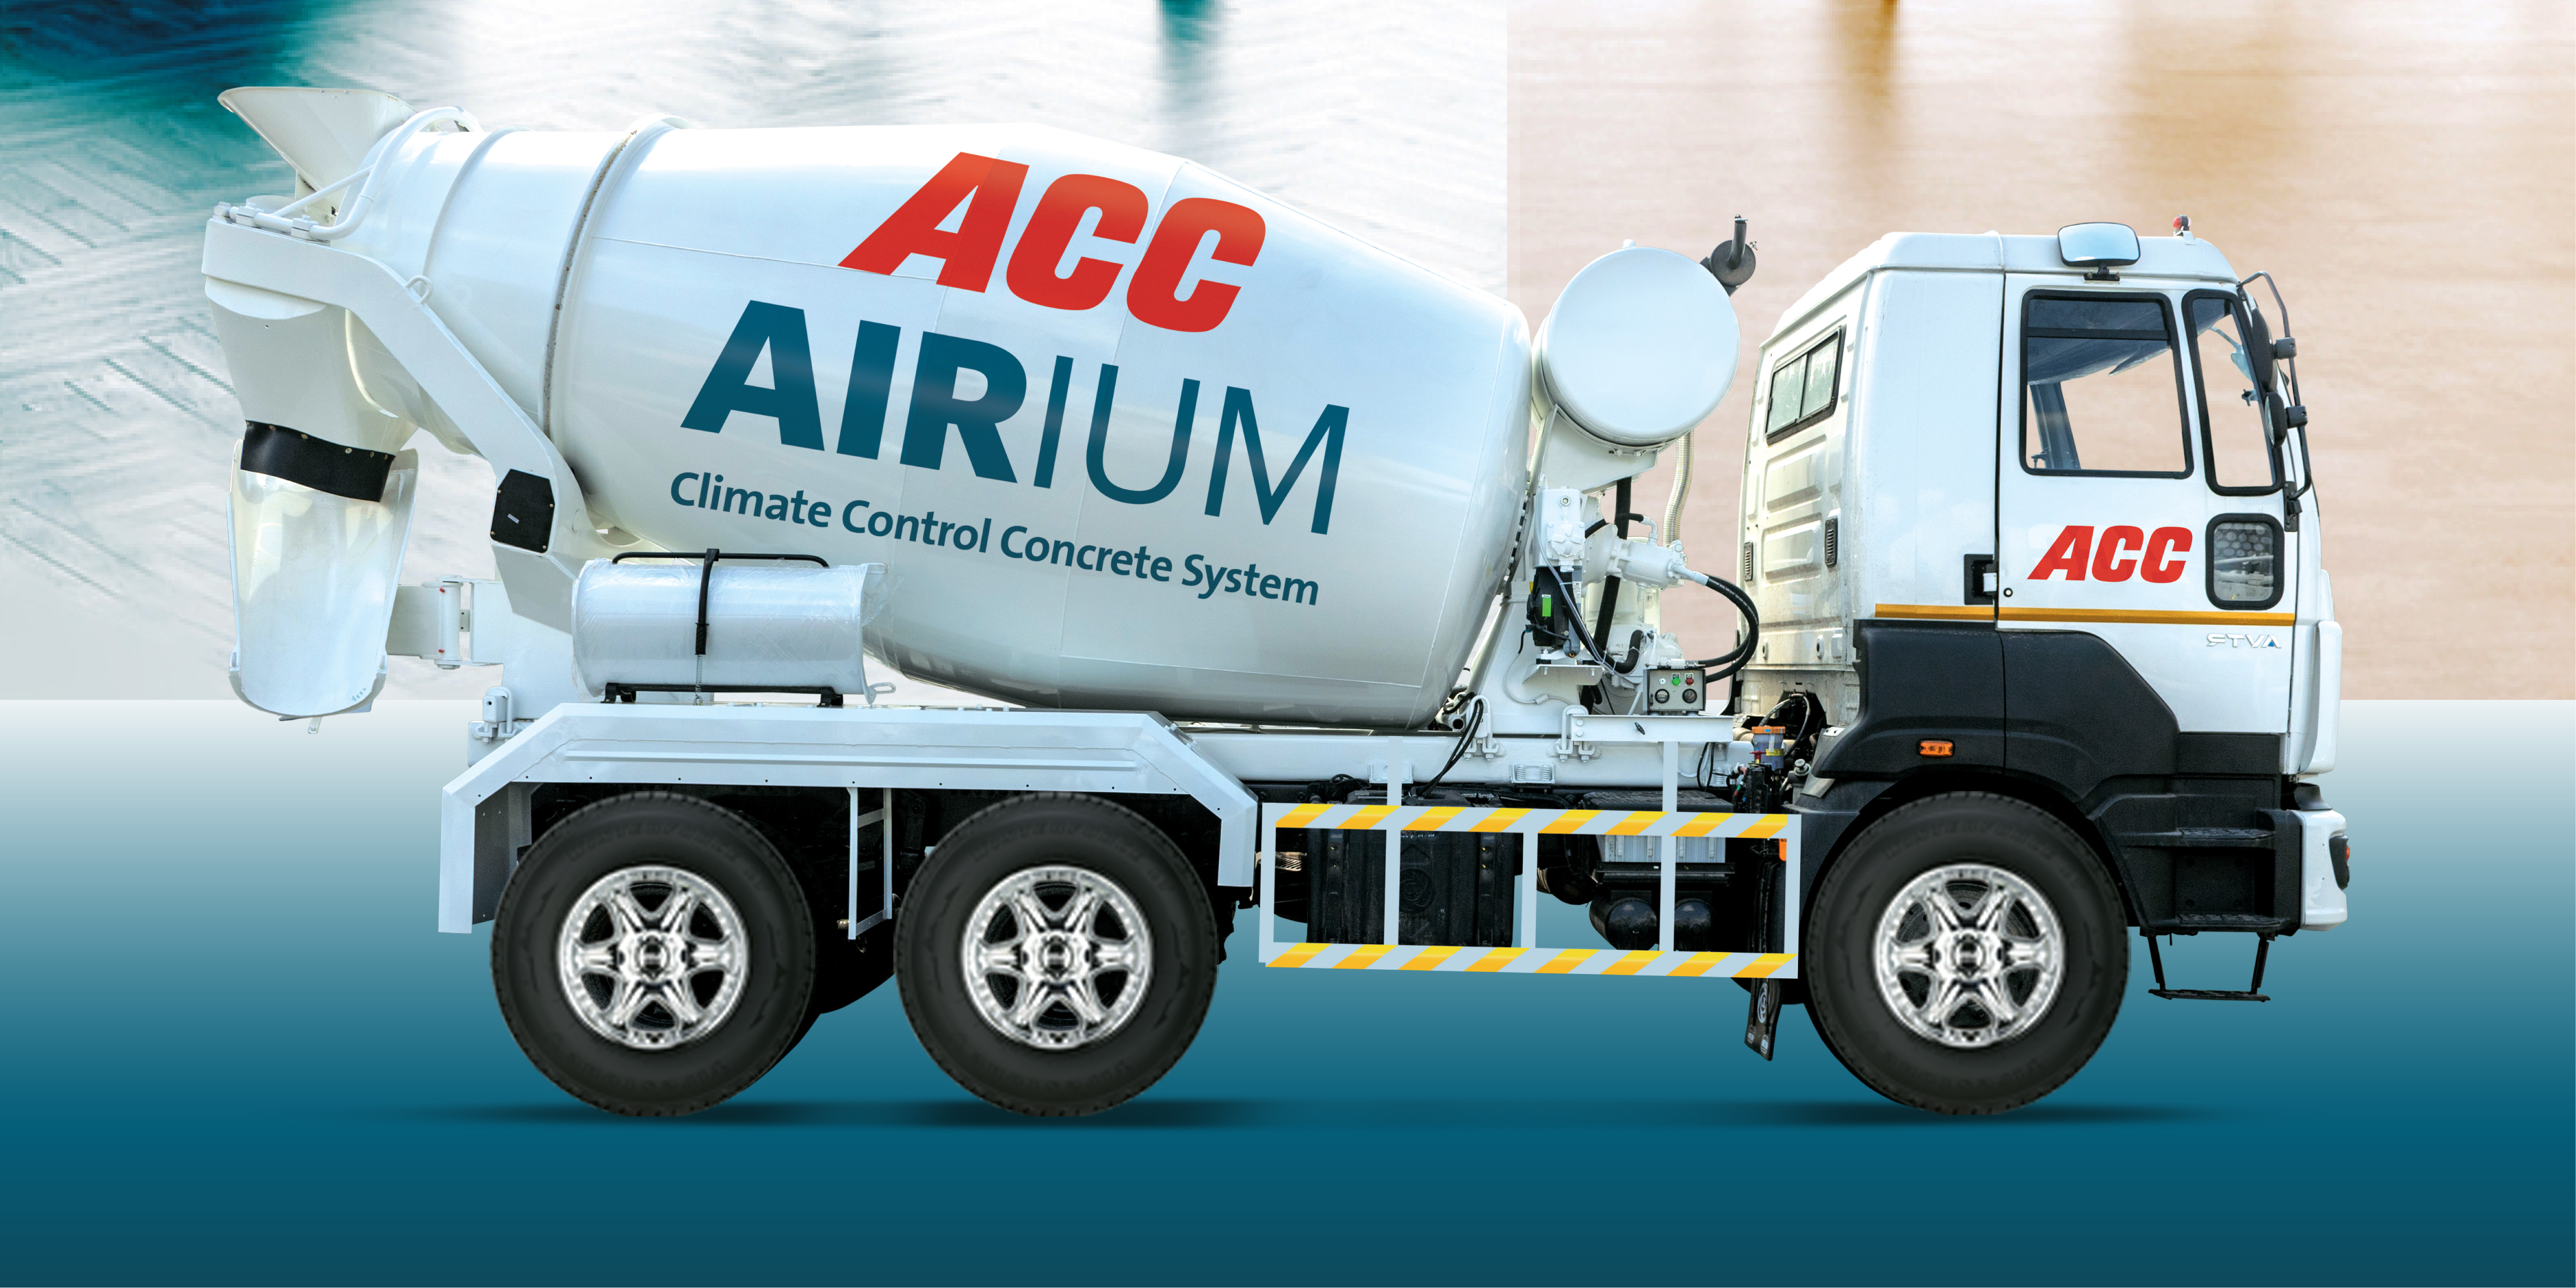 ACC Ltd launches ‘ACC Airium’, a revolutionary climate control concrete insulation system in India